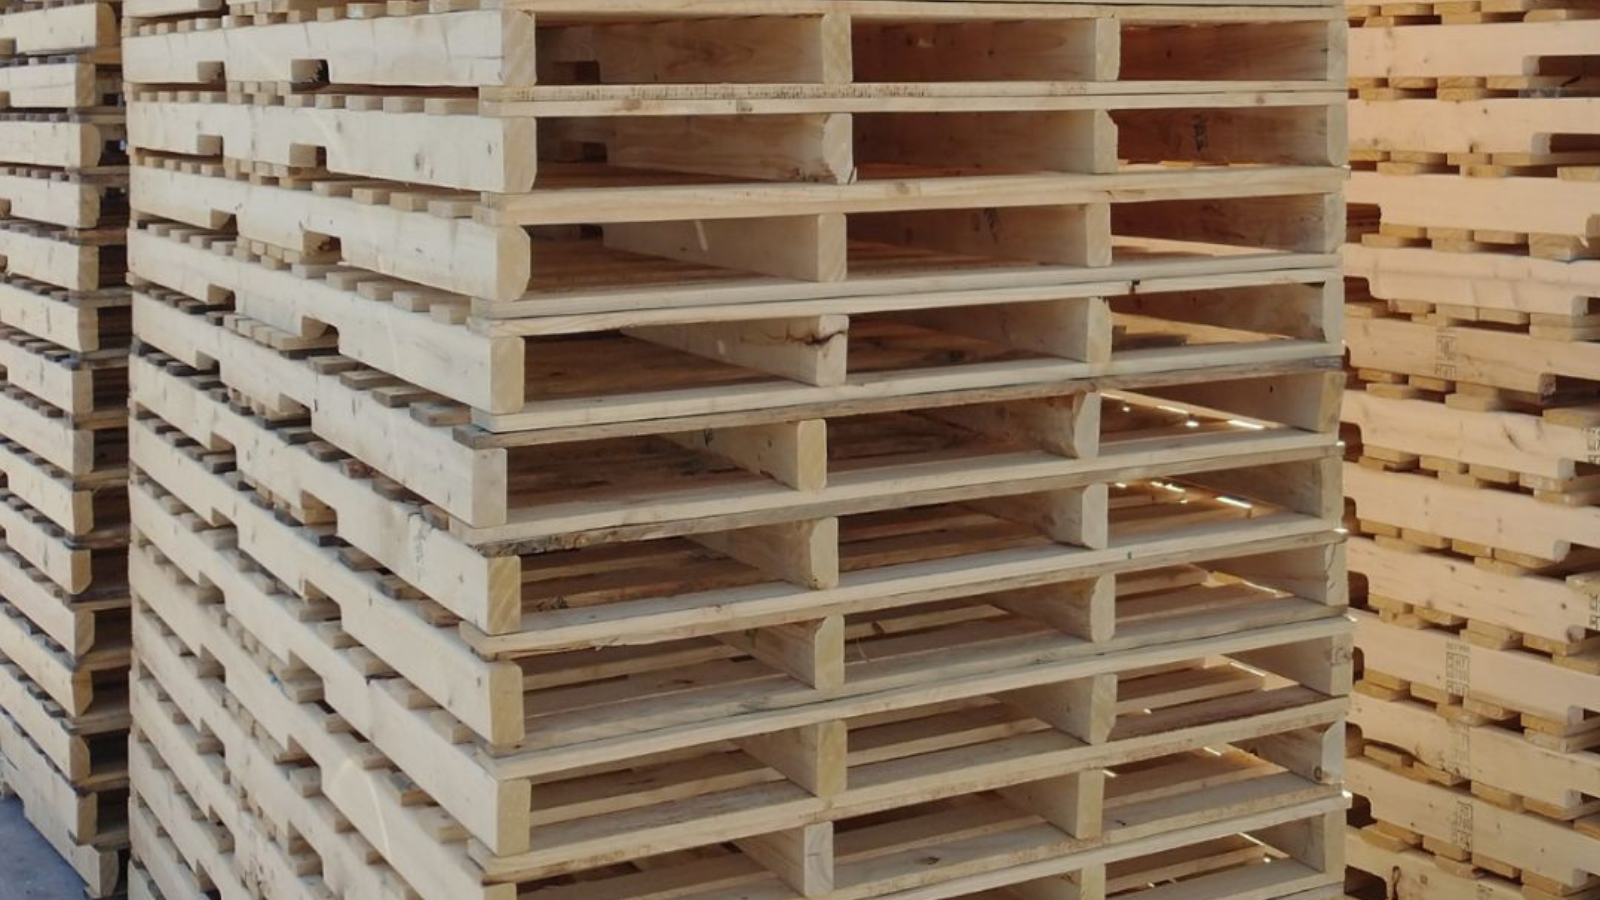 View of New Wood Pallets